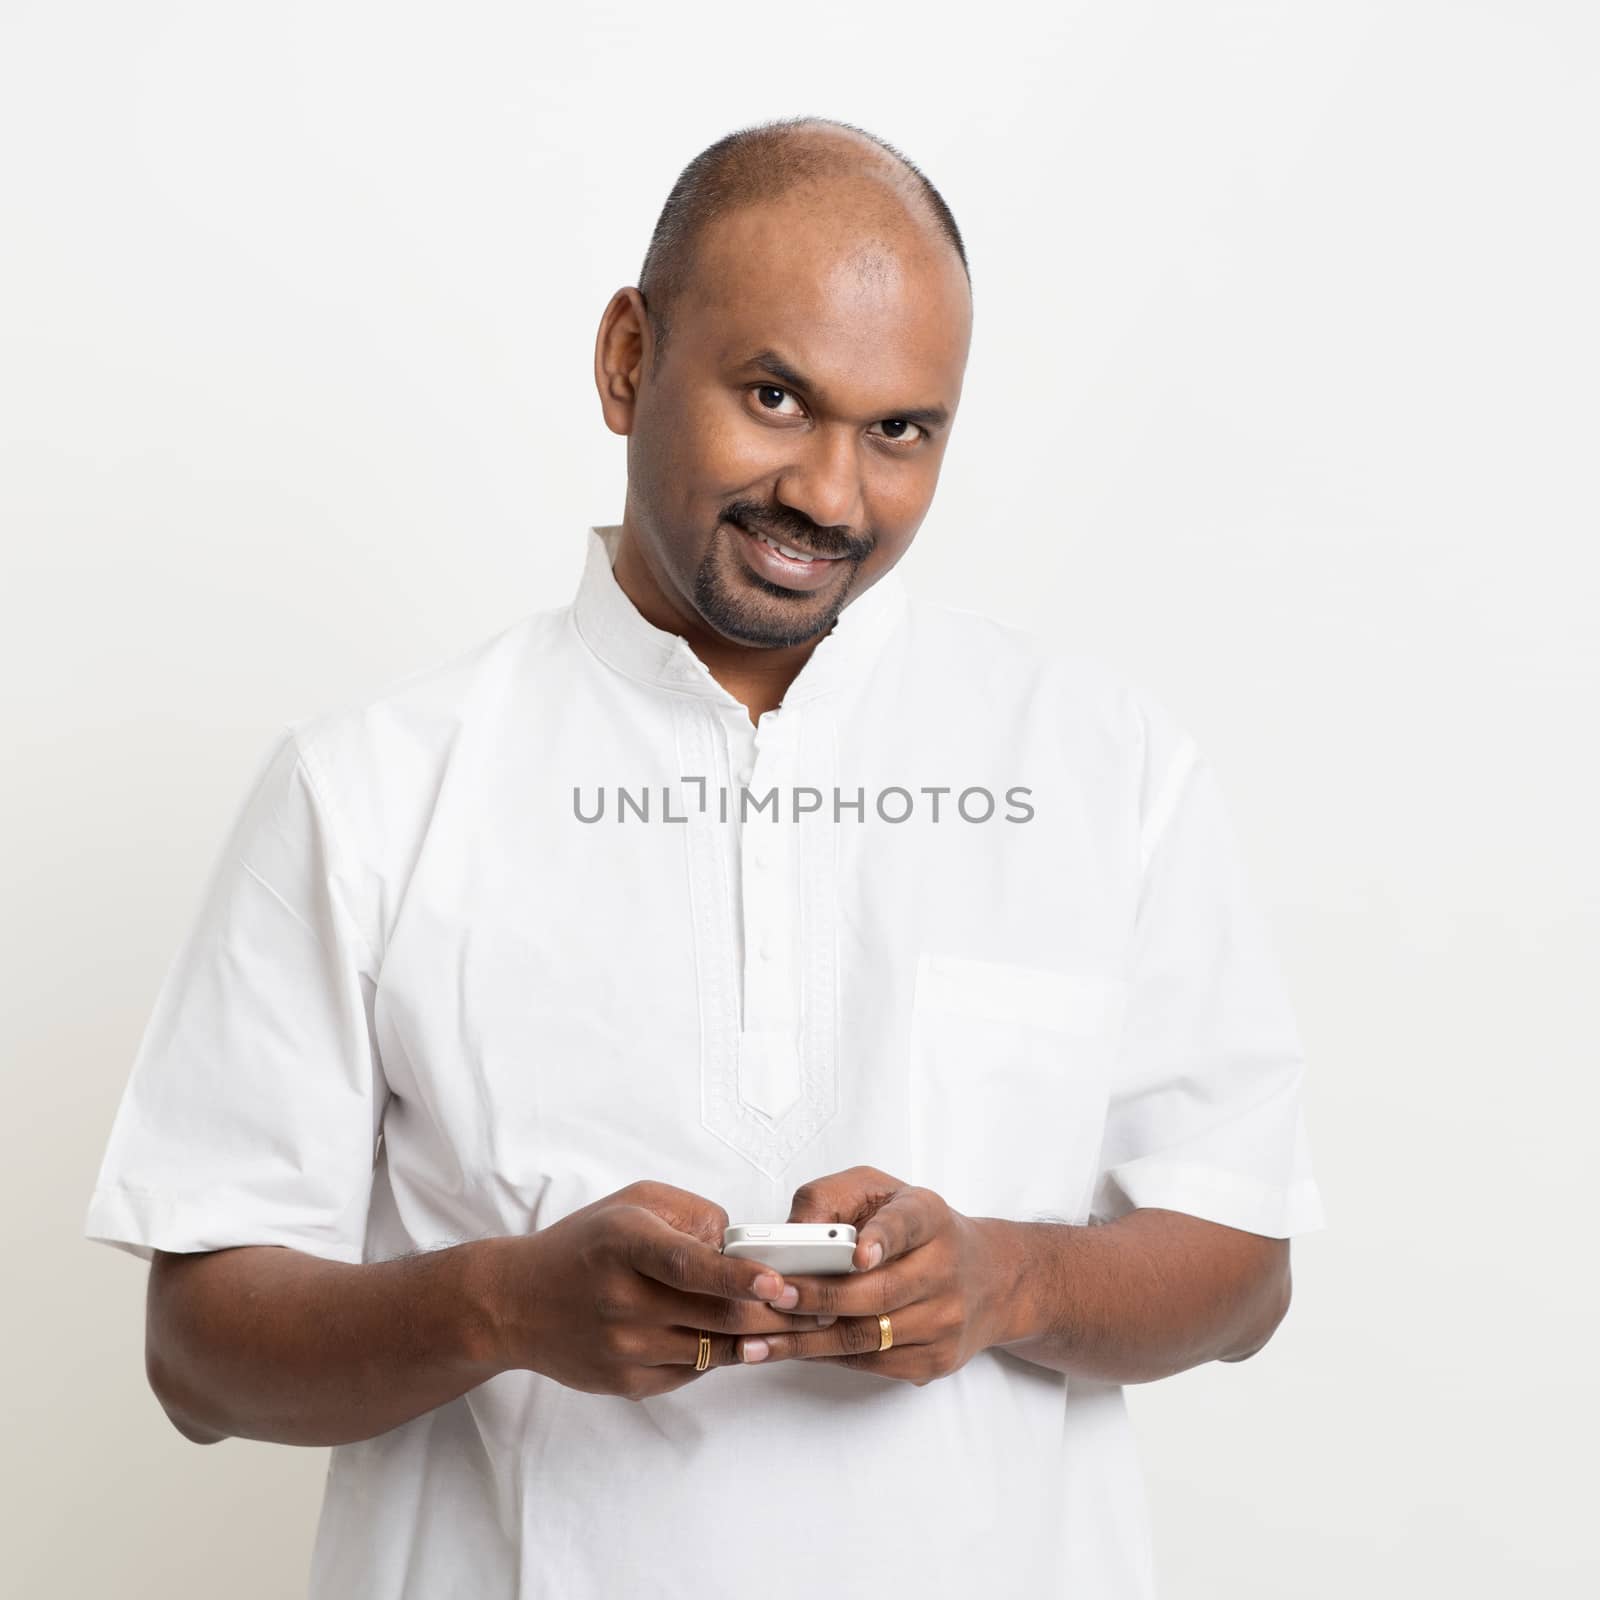 Portrait of mature casual business Indian man texting using smartphone, standing on plain background with shadow.